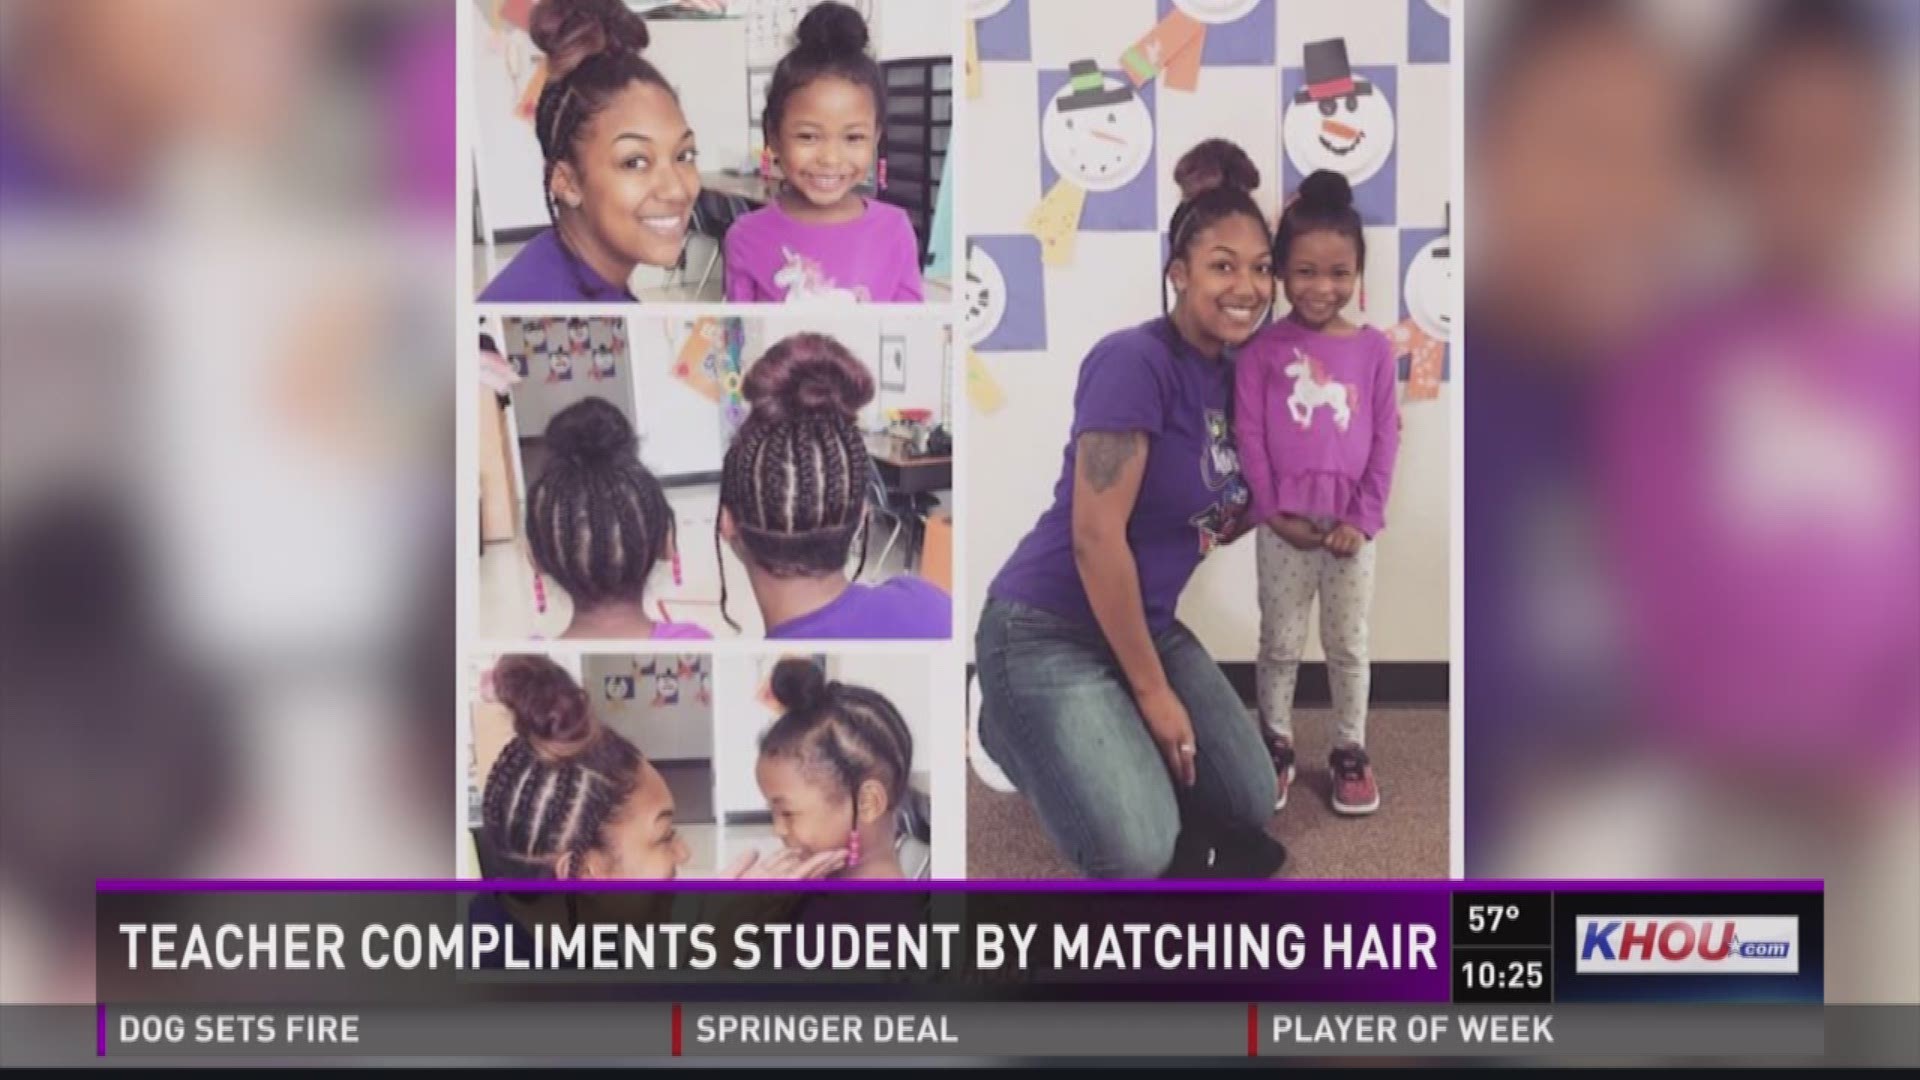 In a sweet and thoughtful gesture, a Sugar Land teacher made one of her student's day when she fixed her hair to match the little girls' new style.